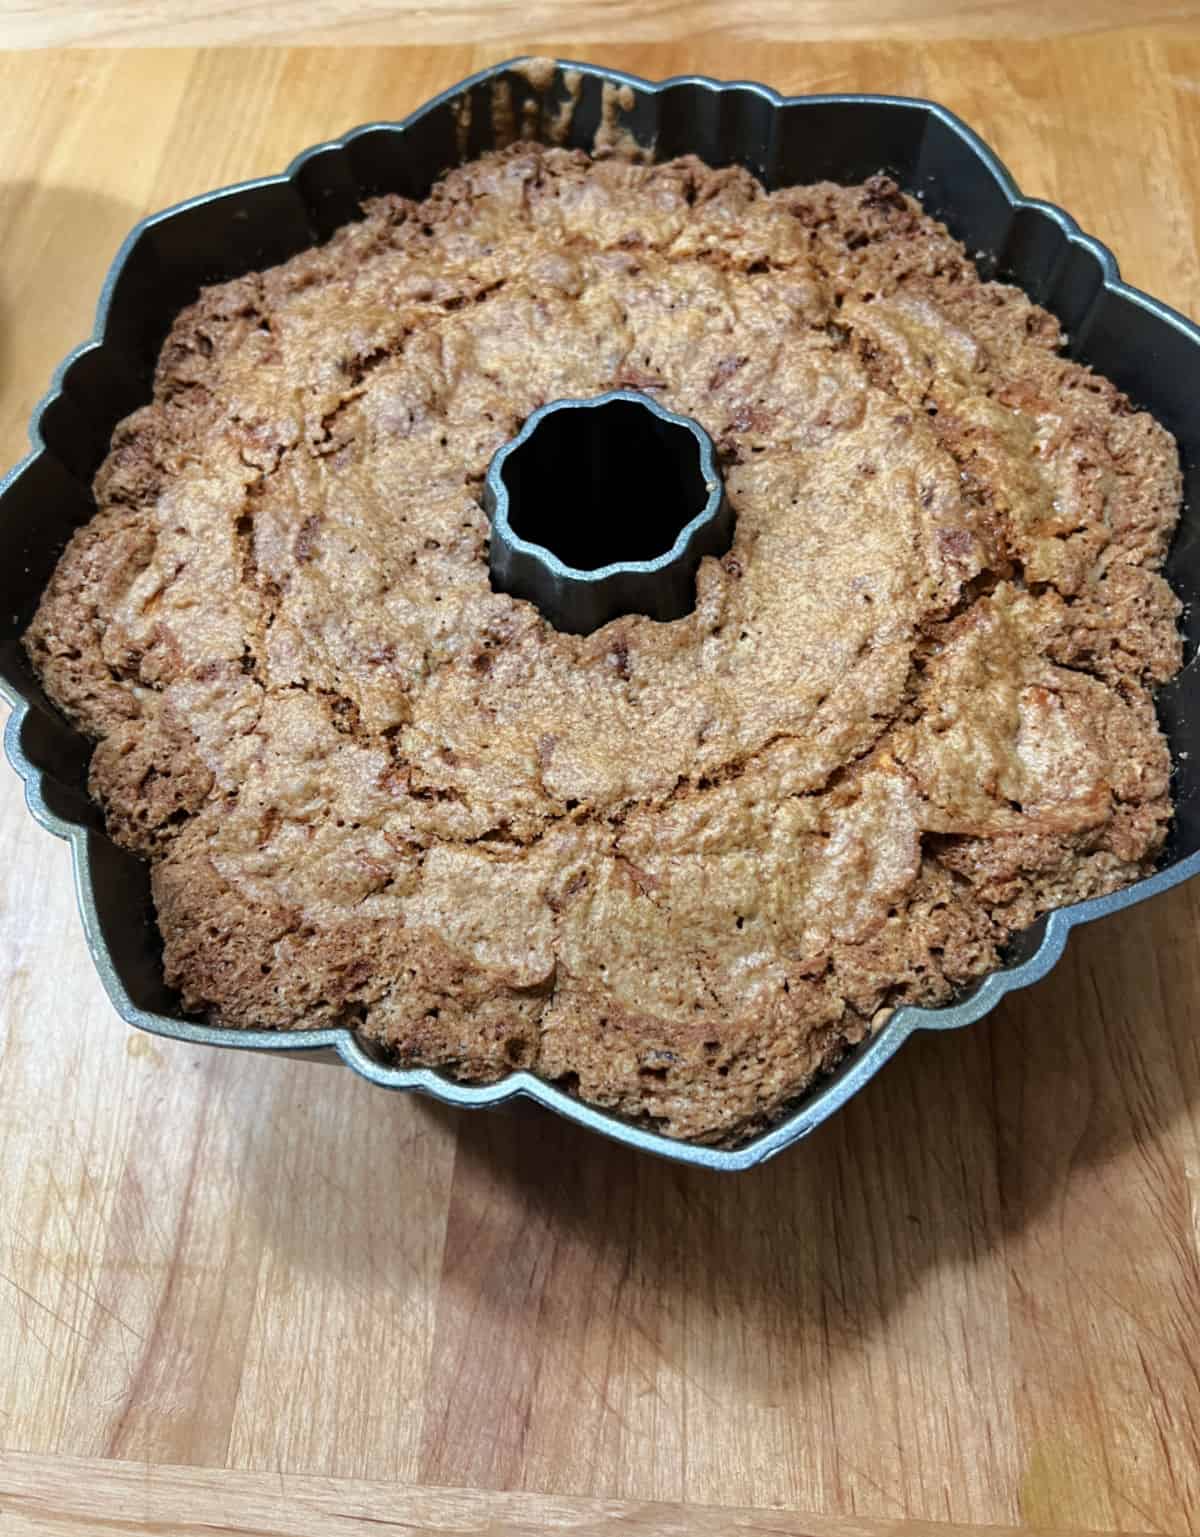 Baked cake cooling in the Bundt pan.